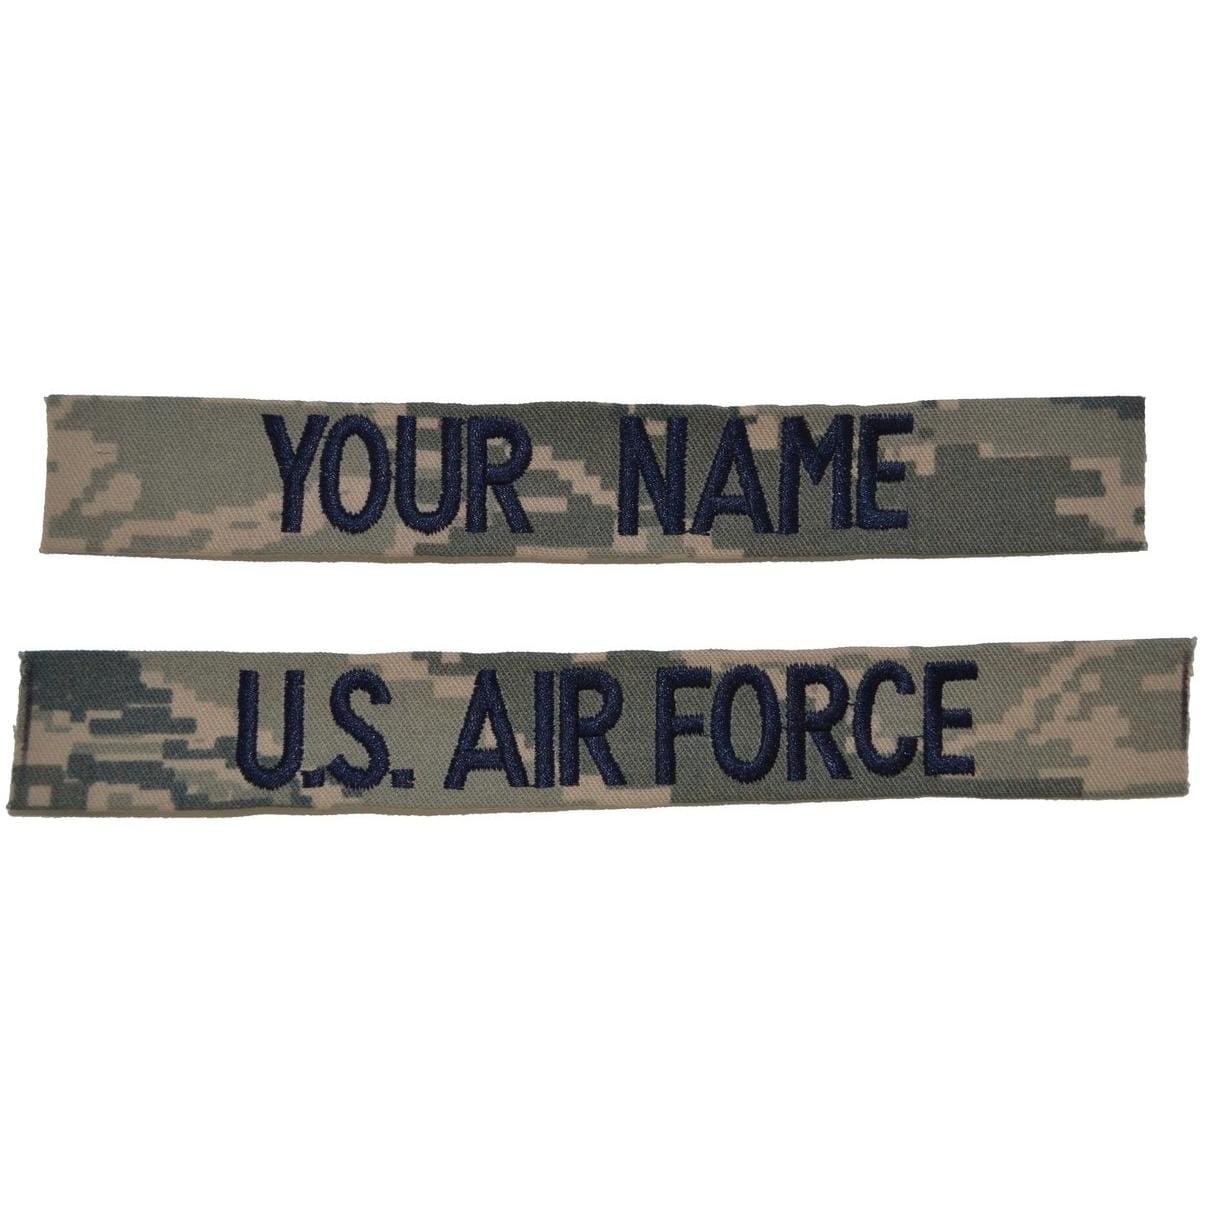 Tactical Gear Junkie Name Tapes 2 Piece Custom Name Tape Set - SEW-ON - ABU